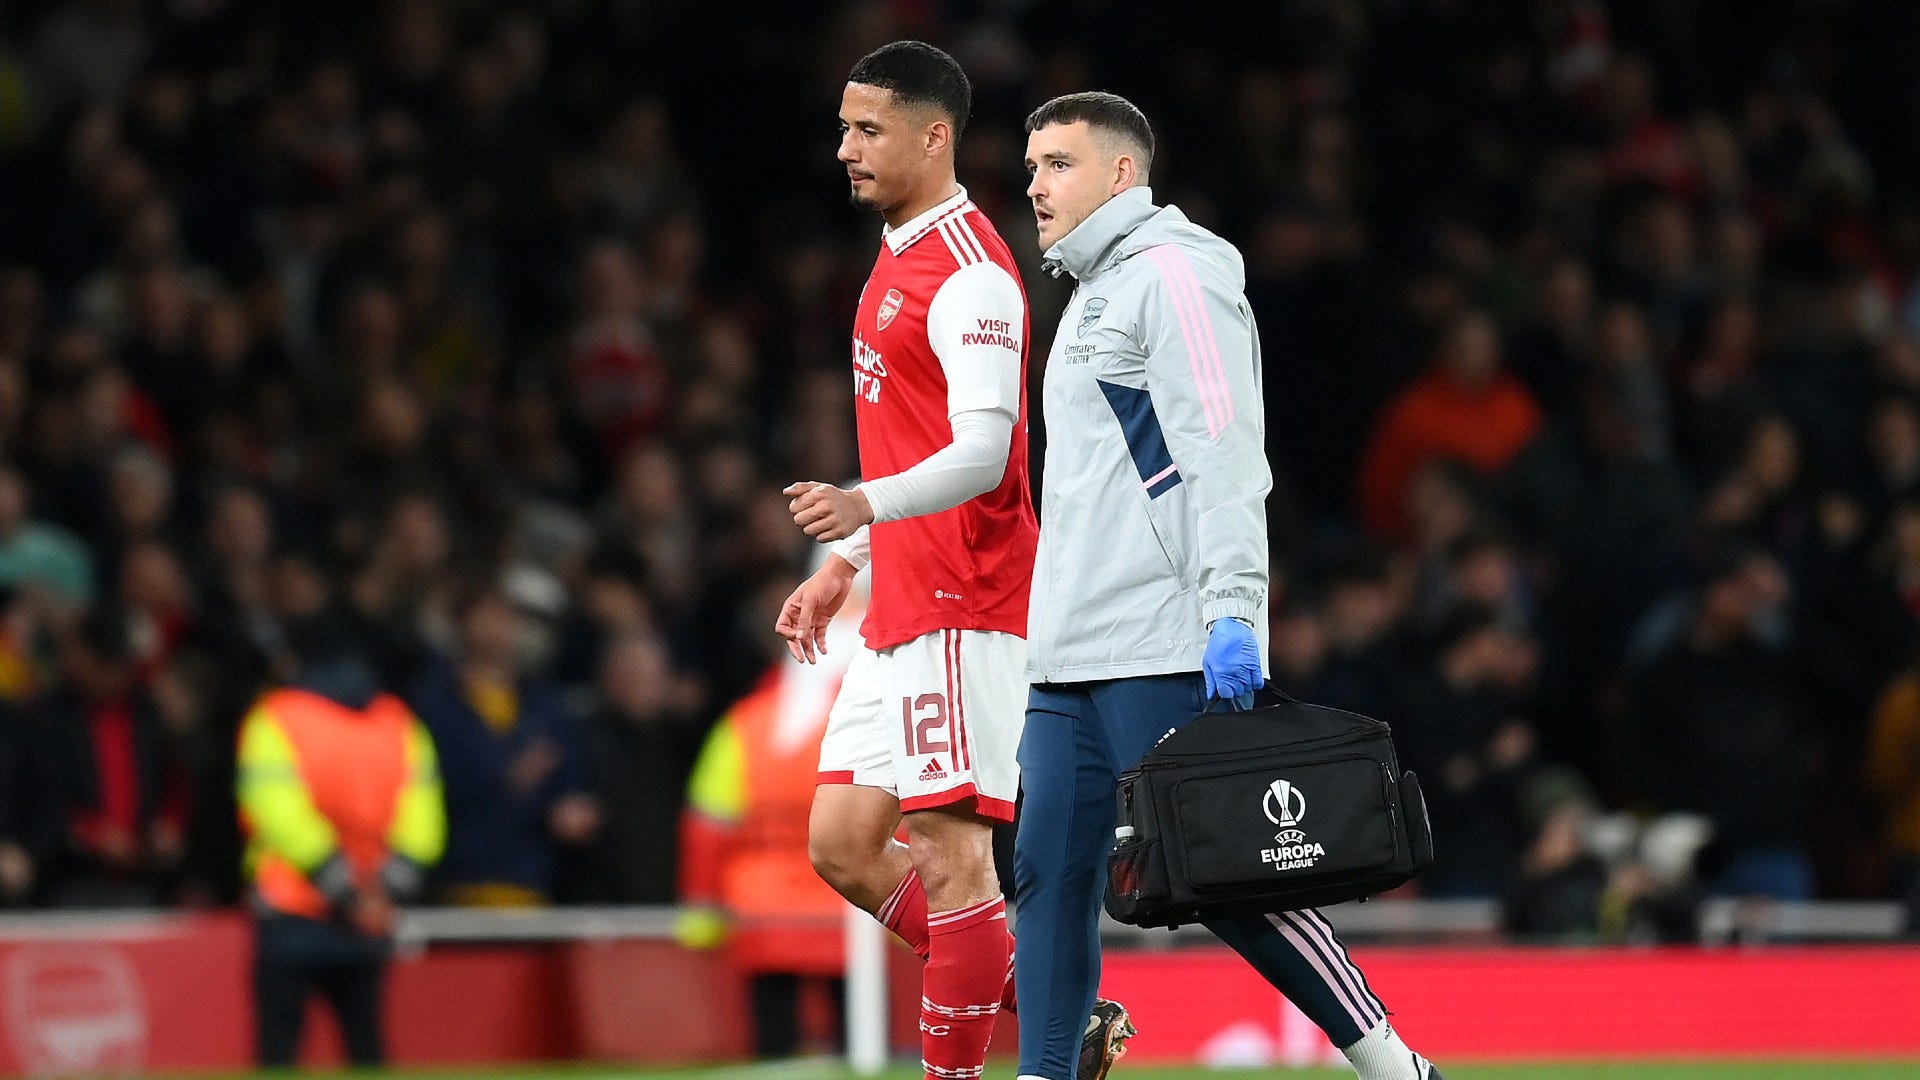 Arsenal defenders William Saliba and Takehiro Tomiyasu have both been forced off during the Gunners' Europa League game against Sporting. - Bóng Đá